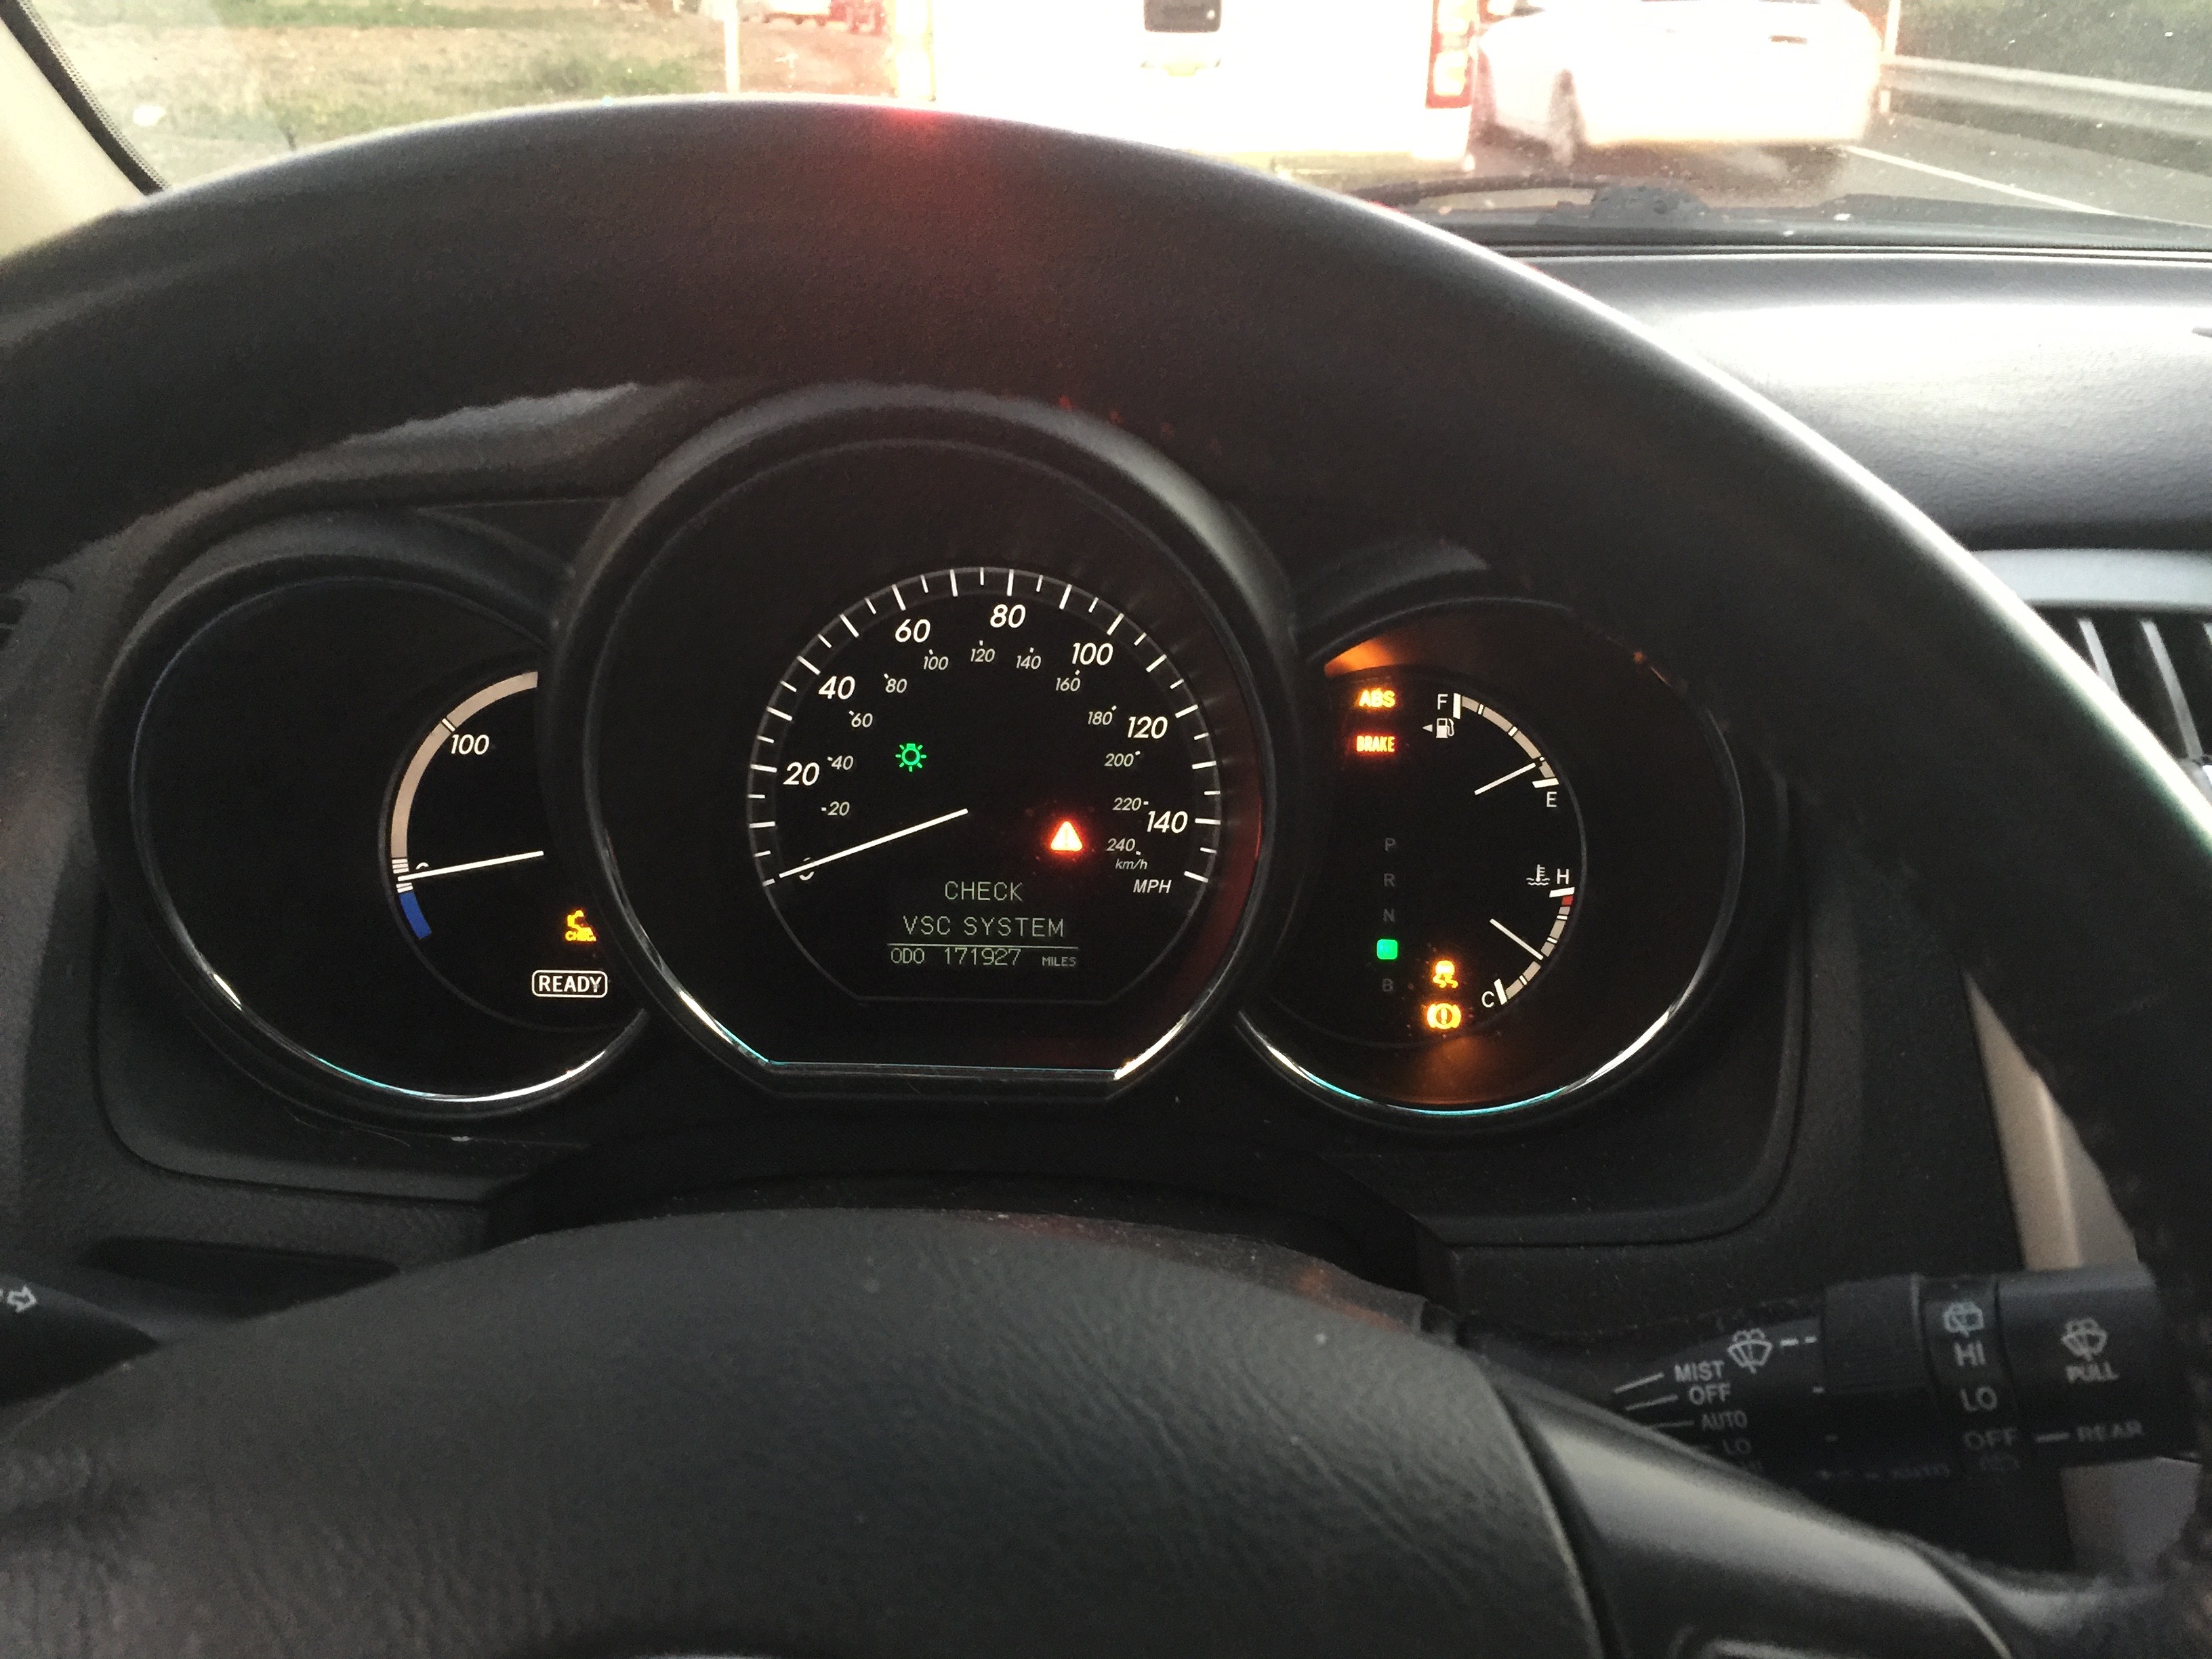 RX400h - Error C1203, VSC & ABS lights on after replacing battery -  ClubLexus - Lexus Forum Discussion